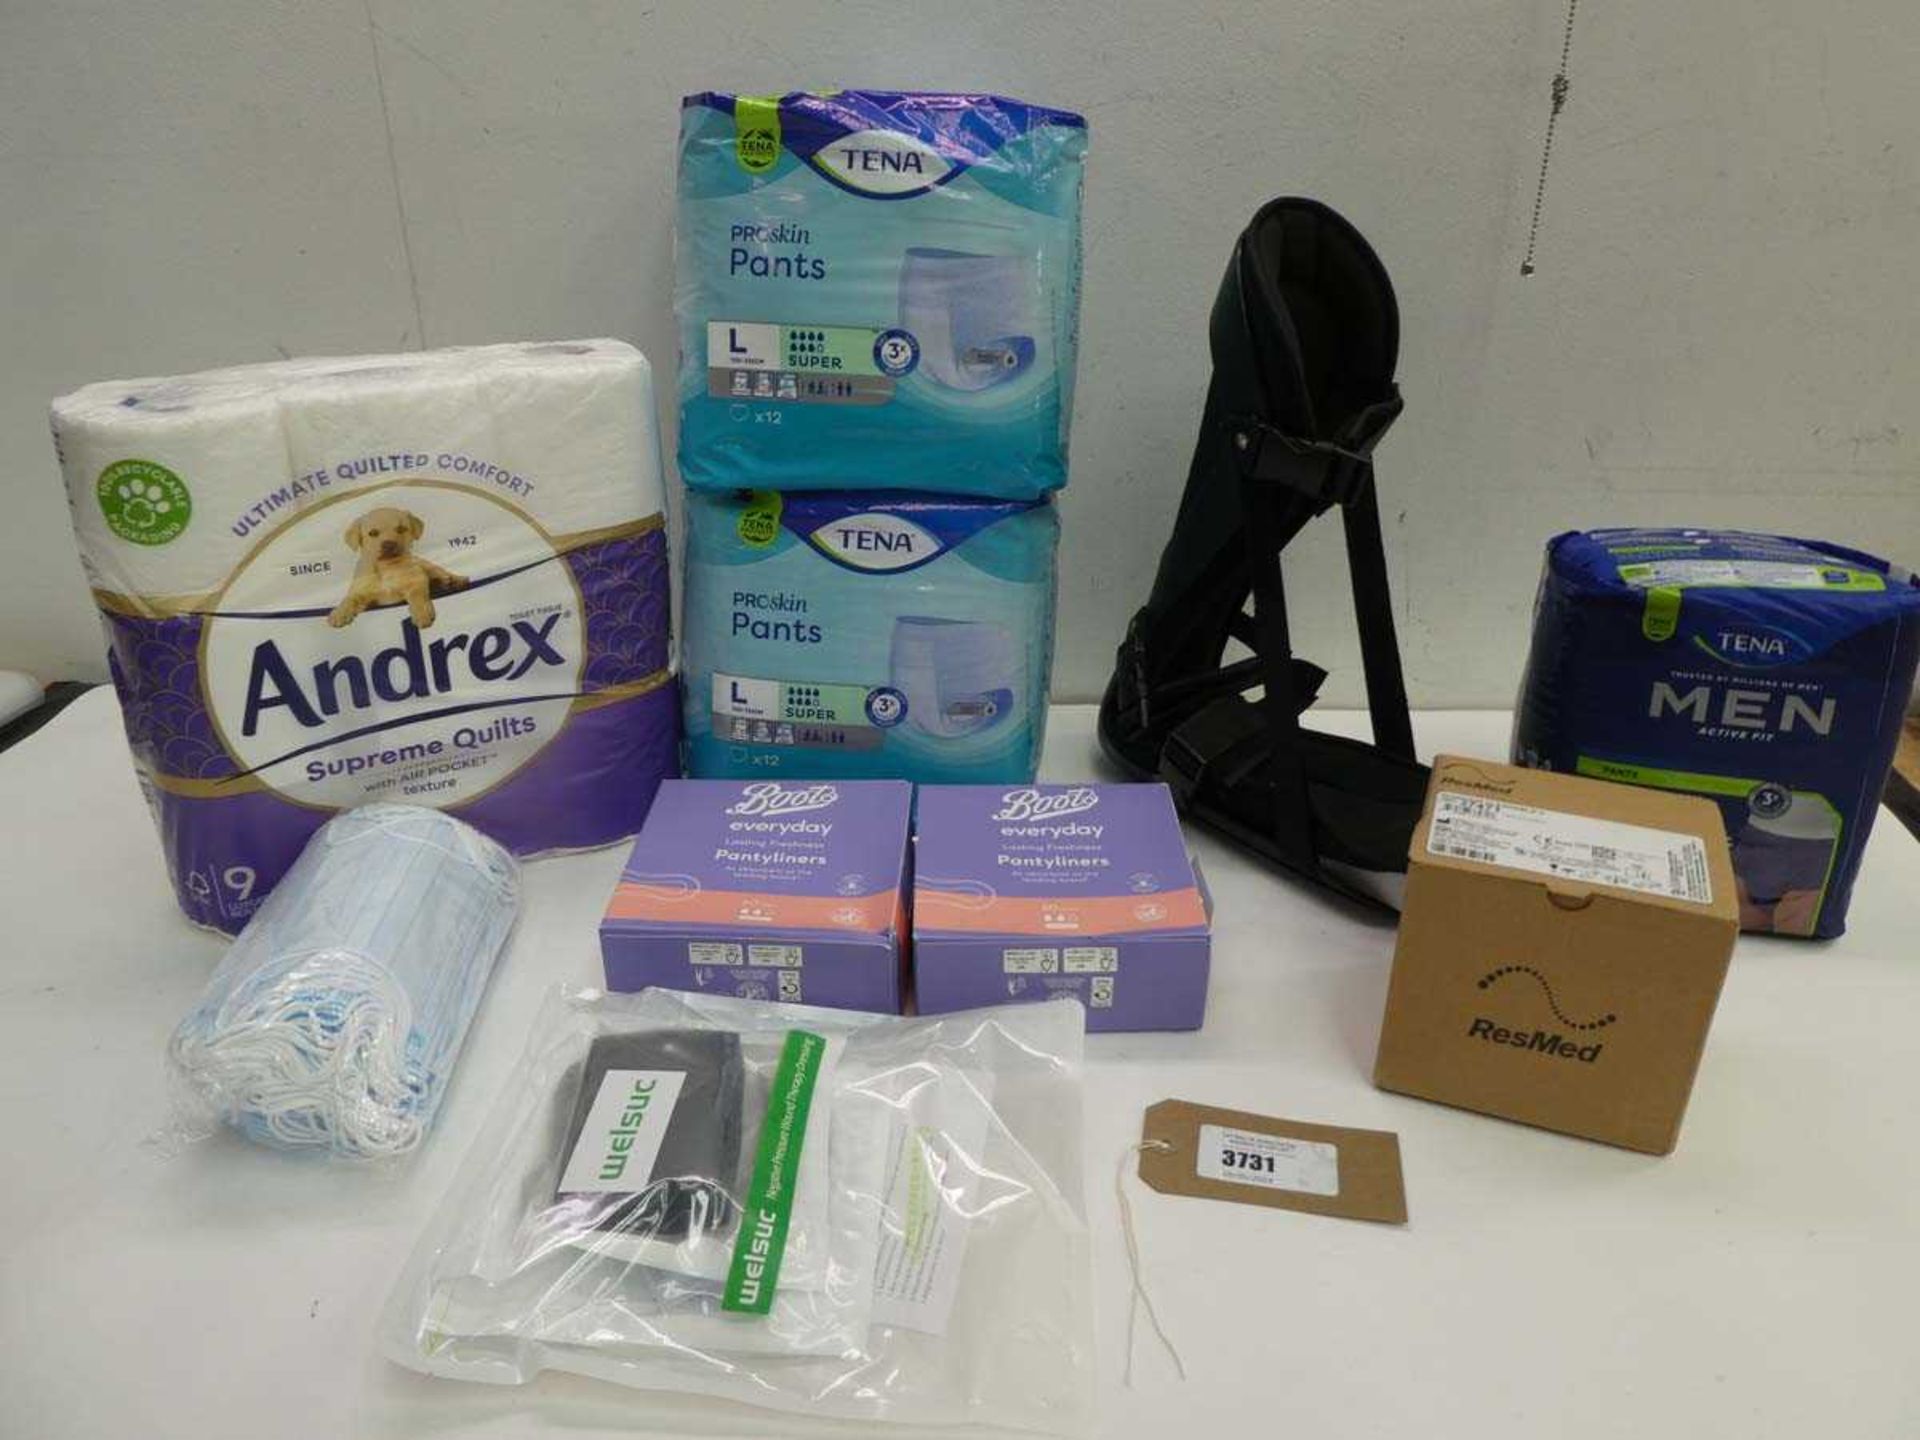 +VAT ResMed Humidair Cleanable II, Tena Proskin pants, Panty liners, face masks, Andrex toilet